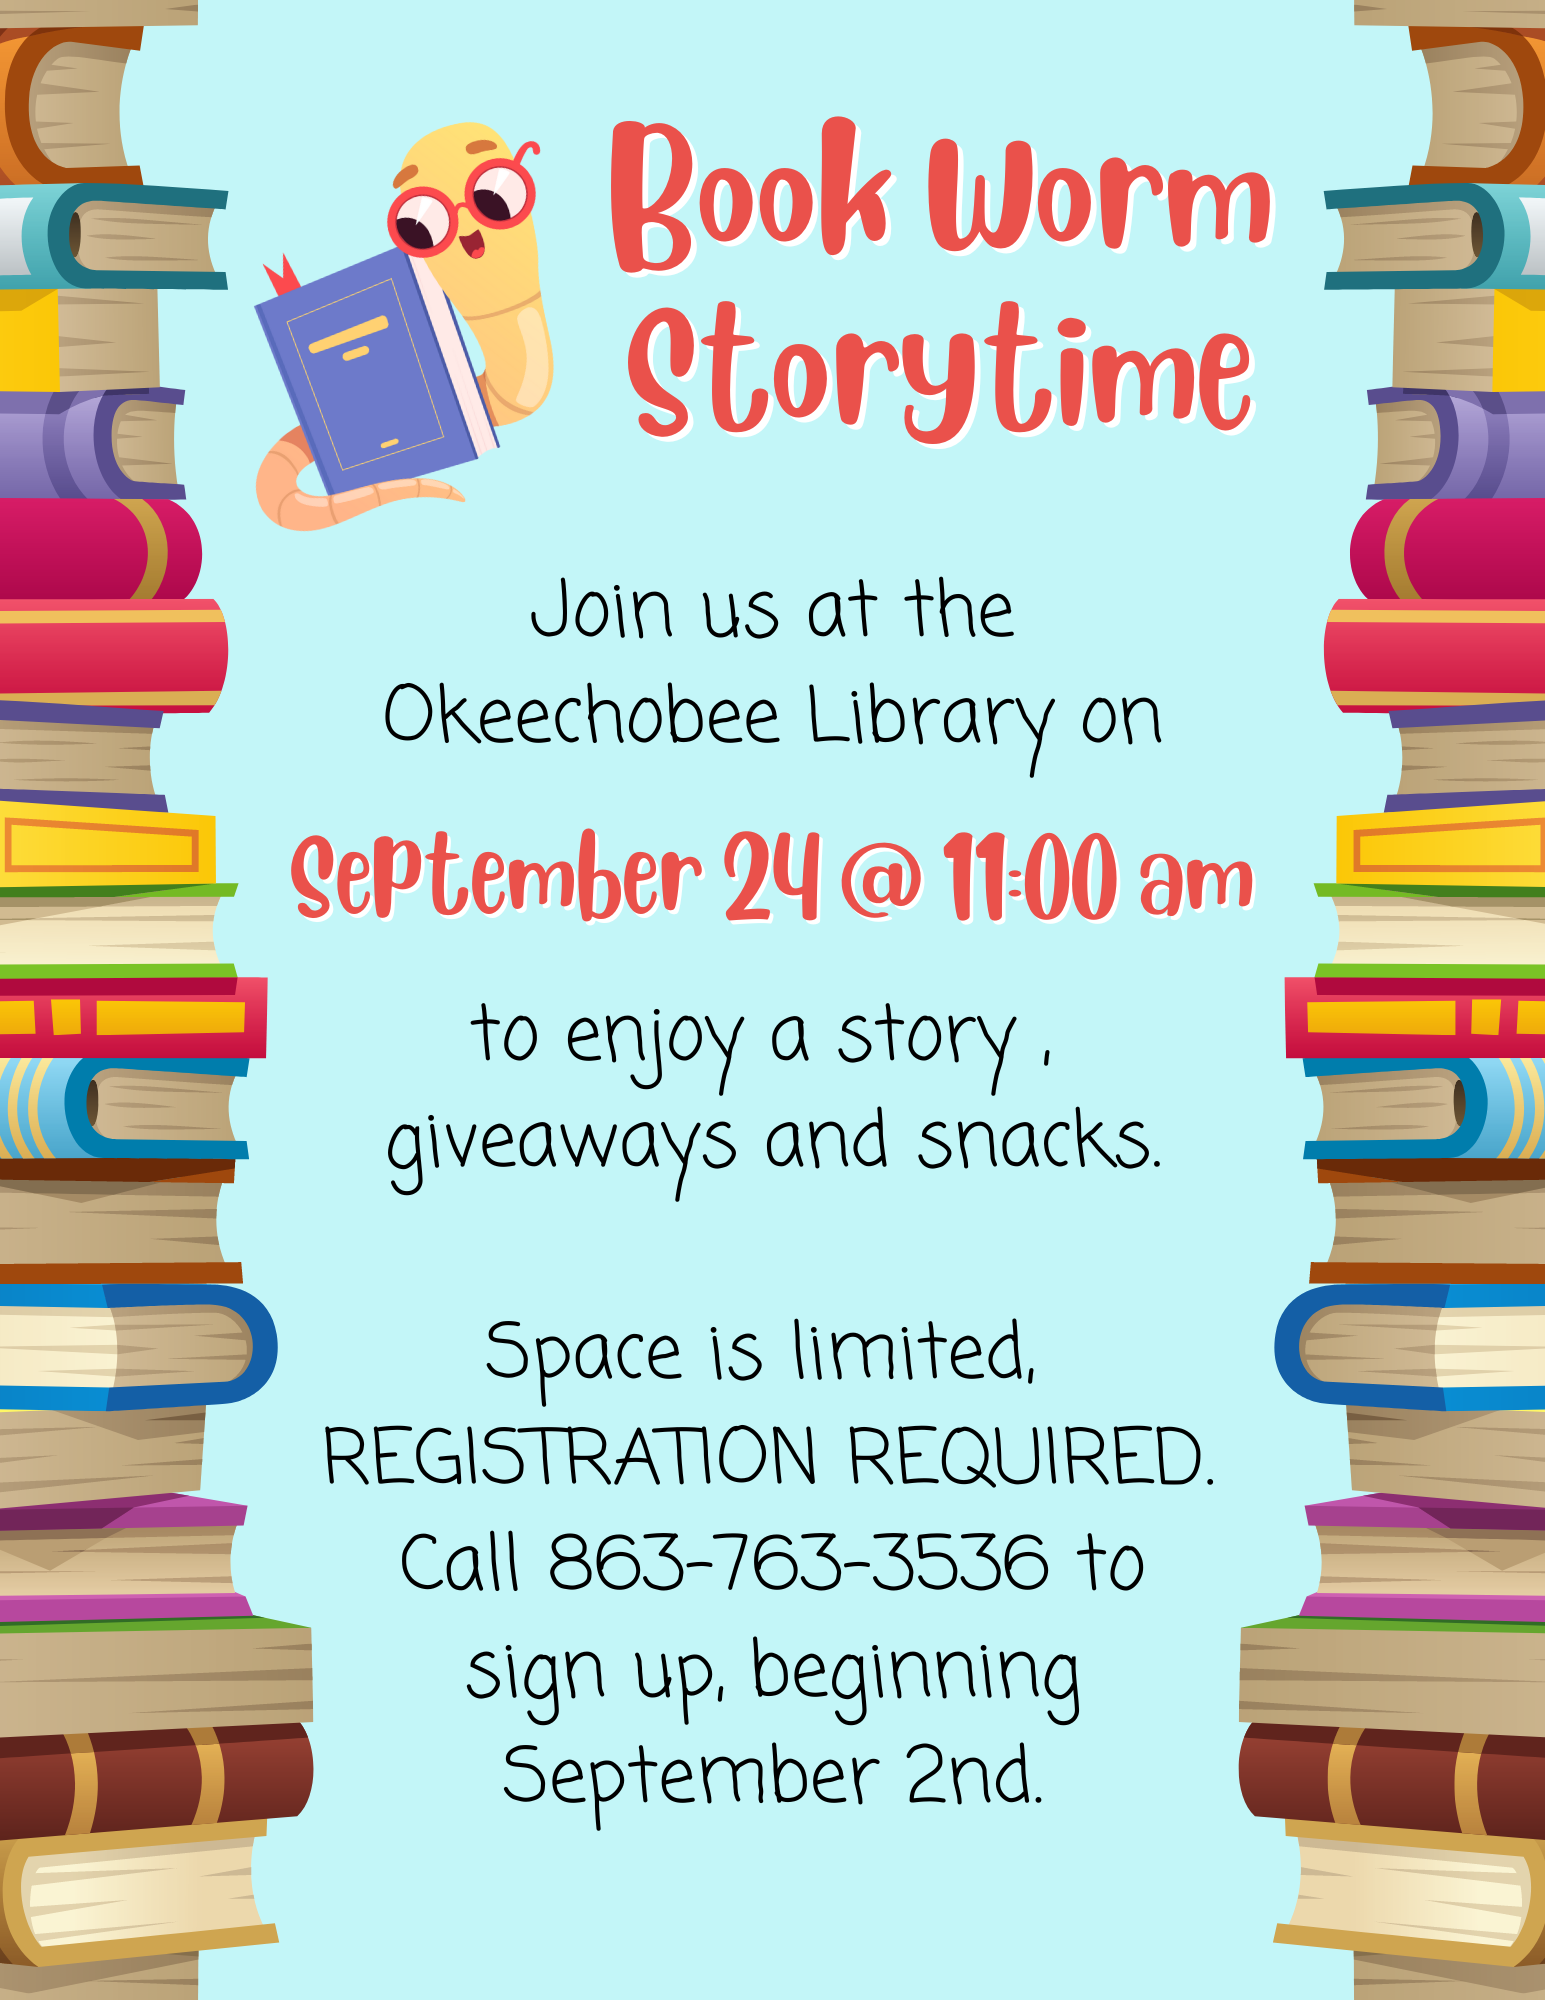 Join us at the Okeechobee Library on Saturday, September 24th at 11am for our Book Worm Storytime! Listen to a story and receive free giveaways and snacks! *SPACE IS LIMITED* REGISTRATION REQUIRED. Call 863-763-3536 to sign up!